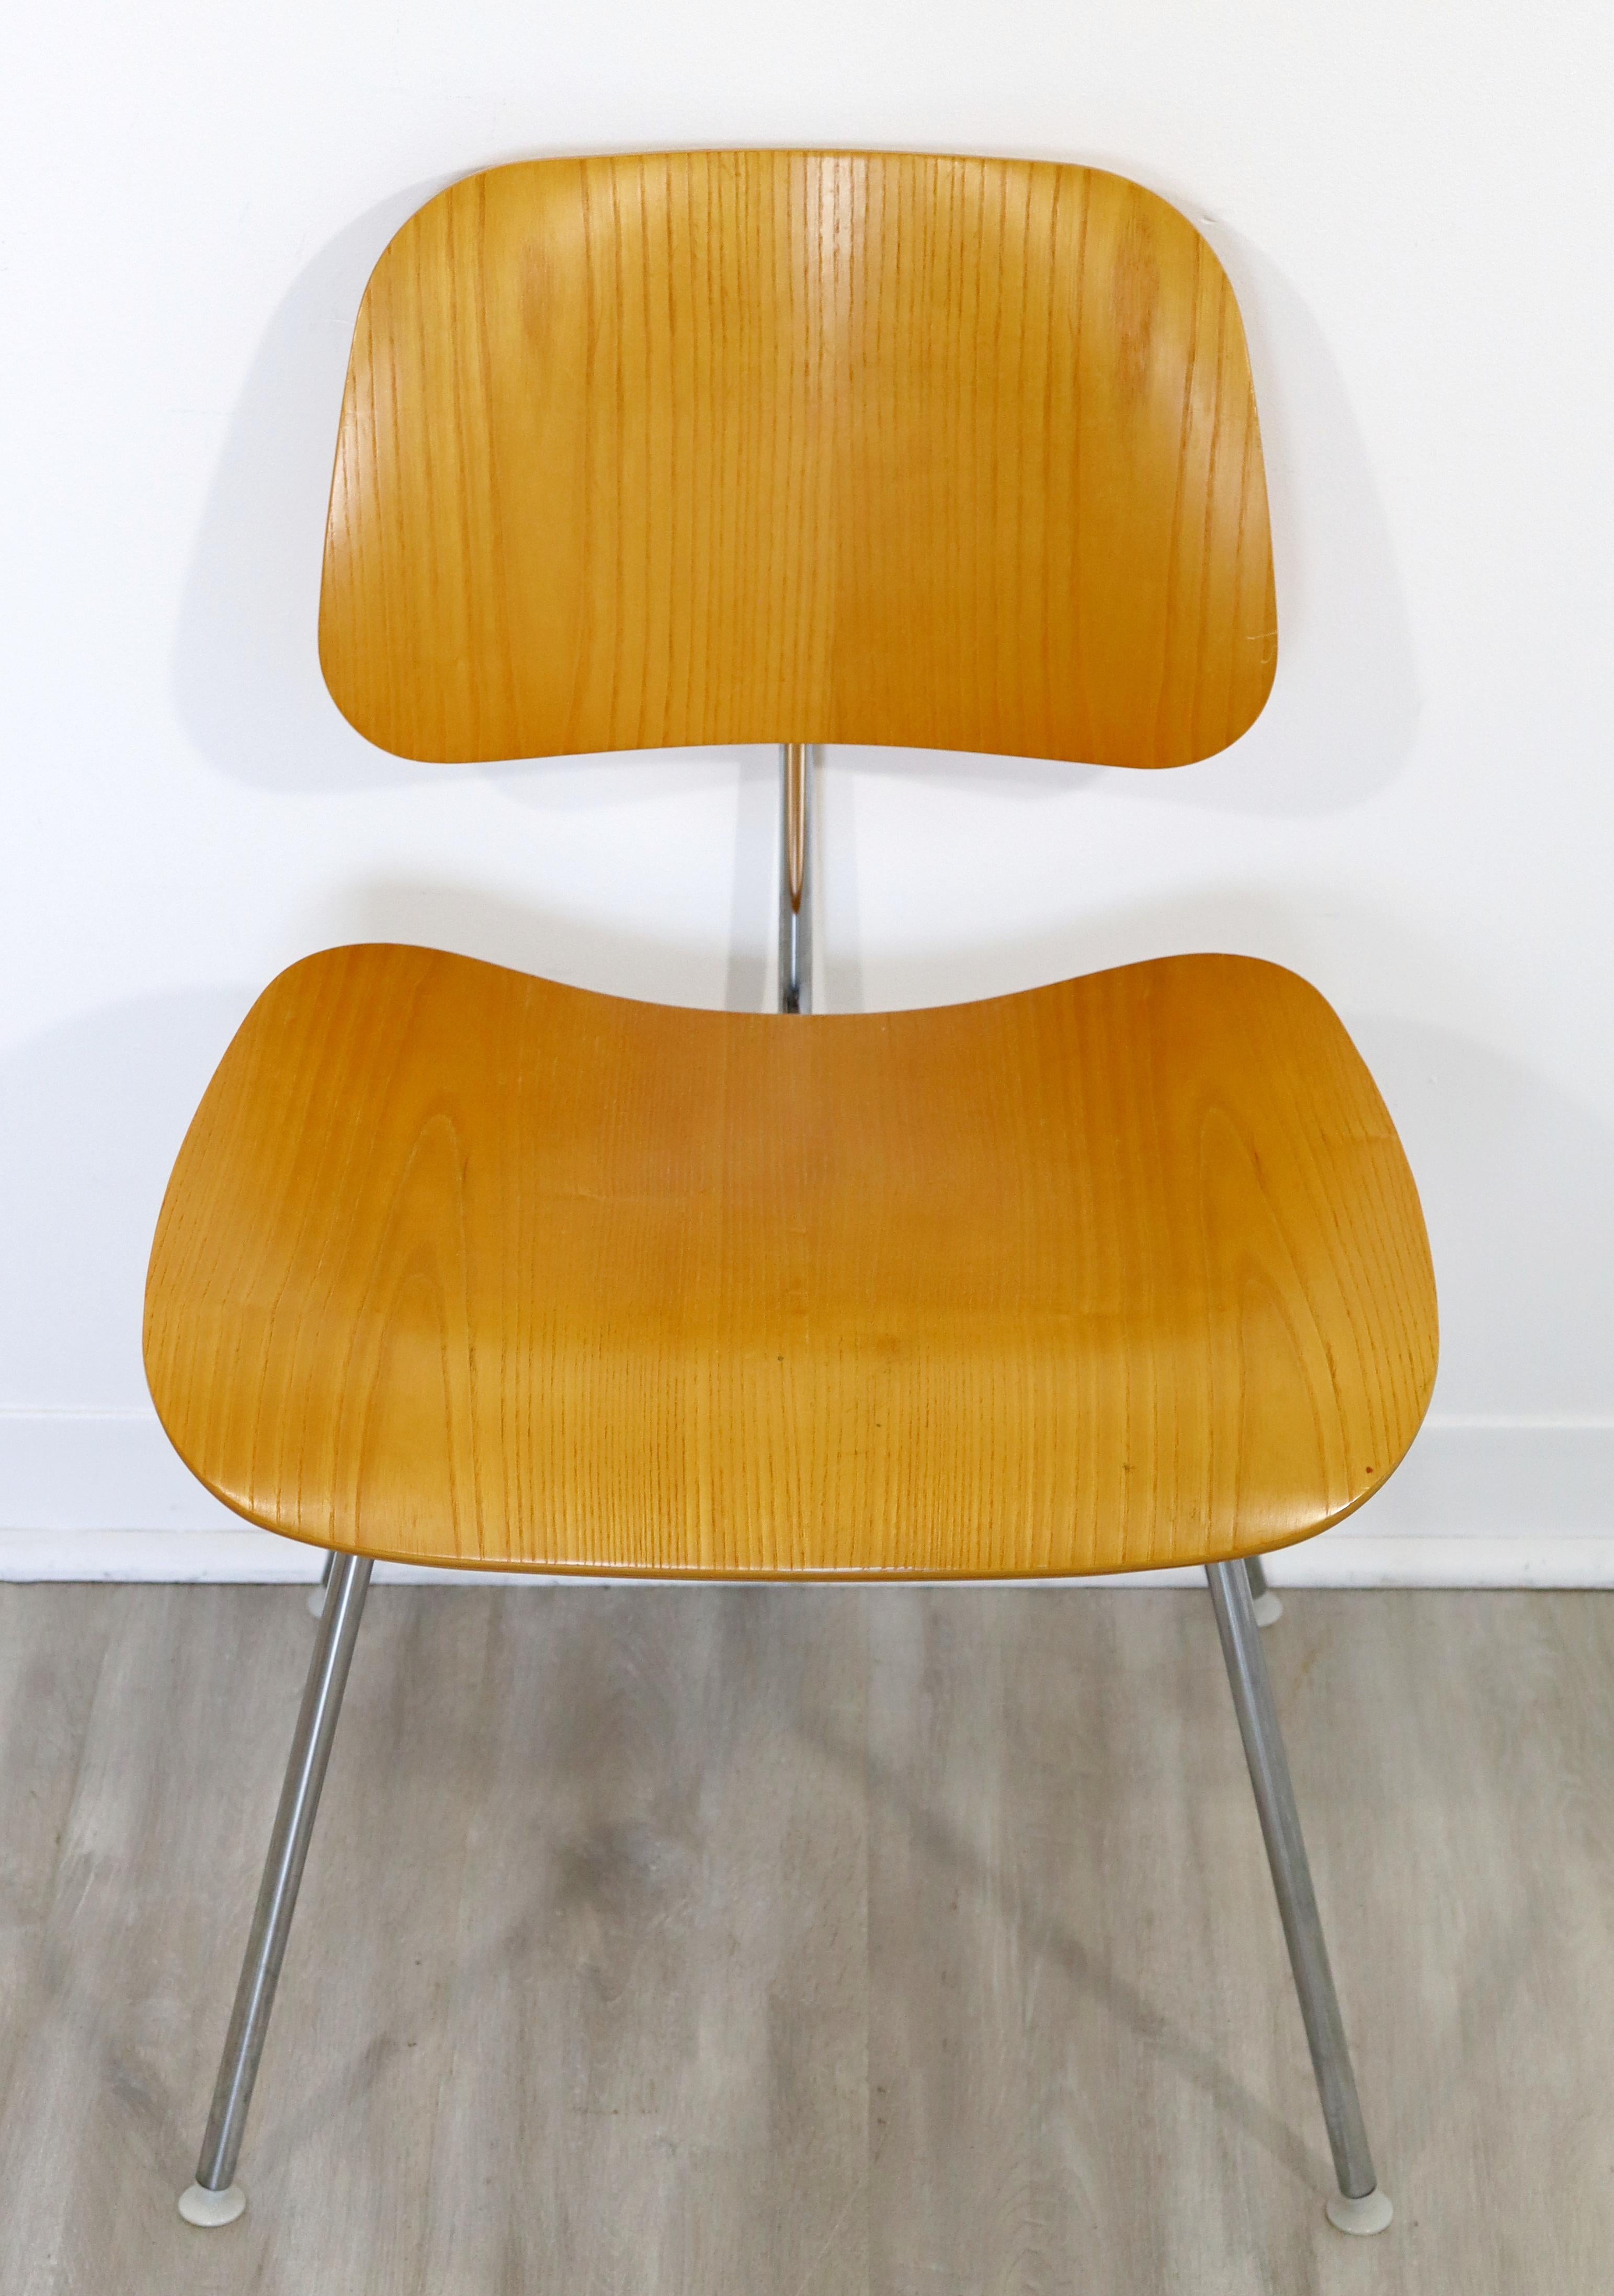 For your consideration is a fantastic set of eight DCW chairs, by Eames for Herman Miller, circa the 2000s. In excellent condition. The dimensions are 19.5